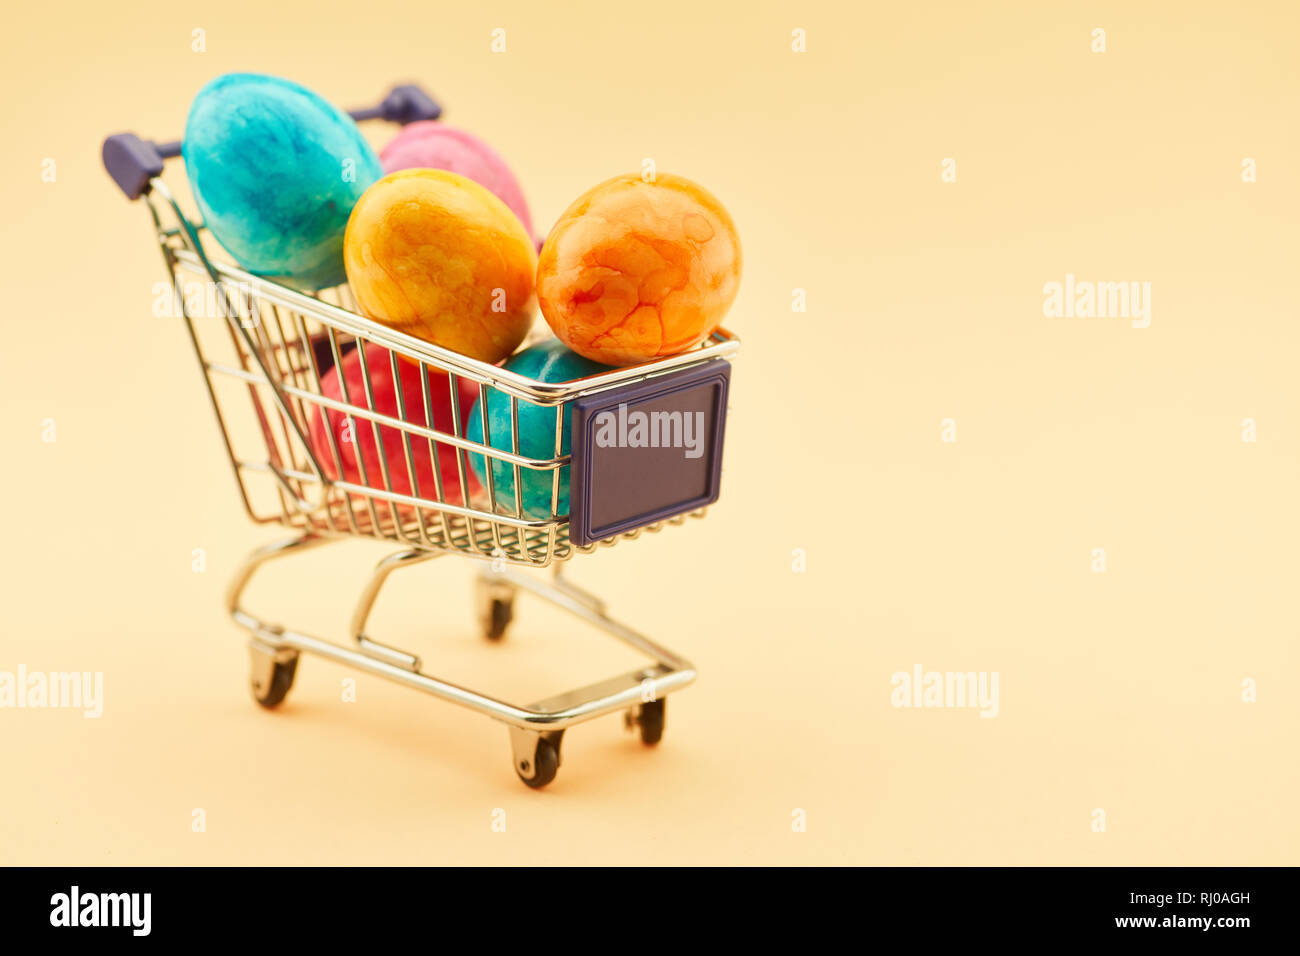 Easter shopping concept with shopping cart full of colorful easter eggs Stock Photo